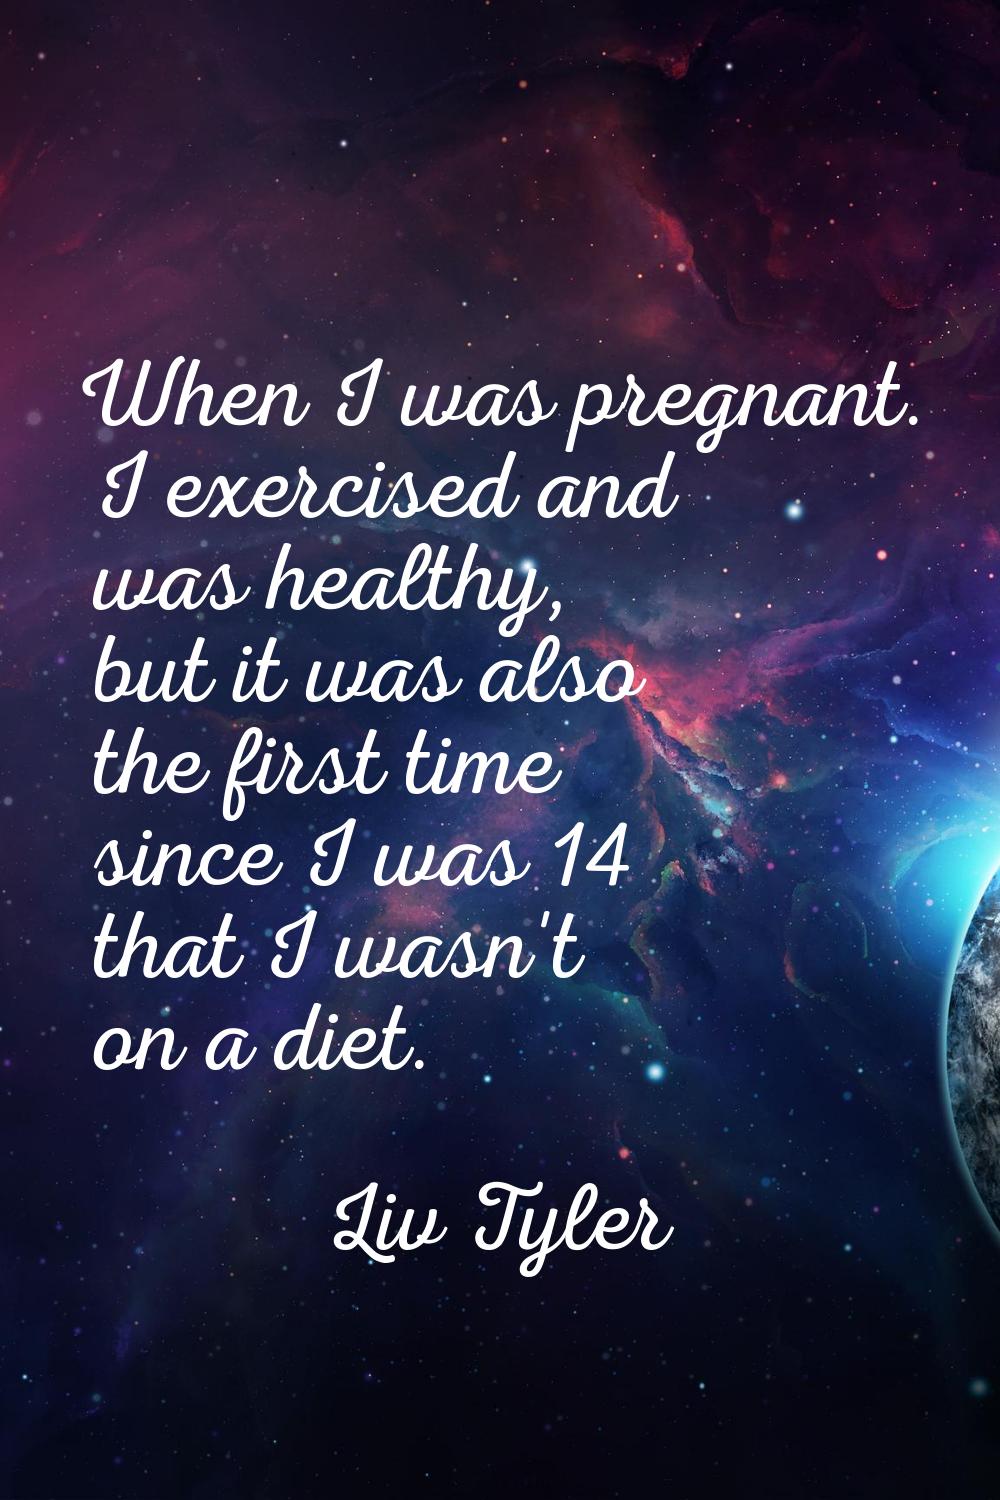 When I was pregnant. I exercised and was healthy, but it was also the first time since I was 14 tha